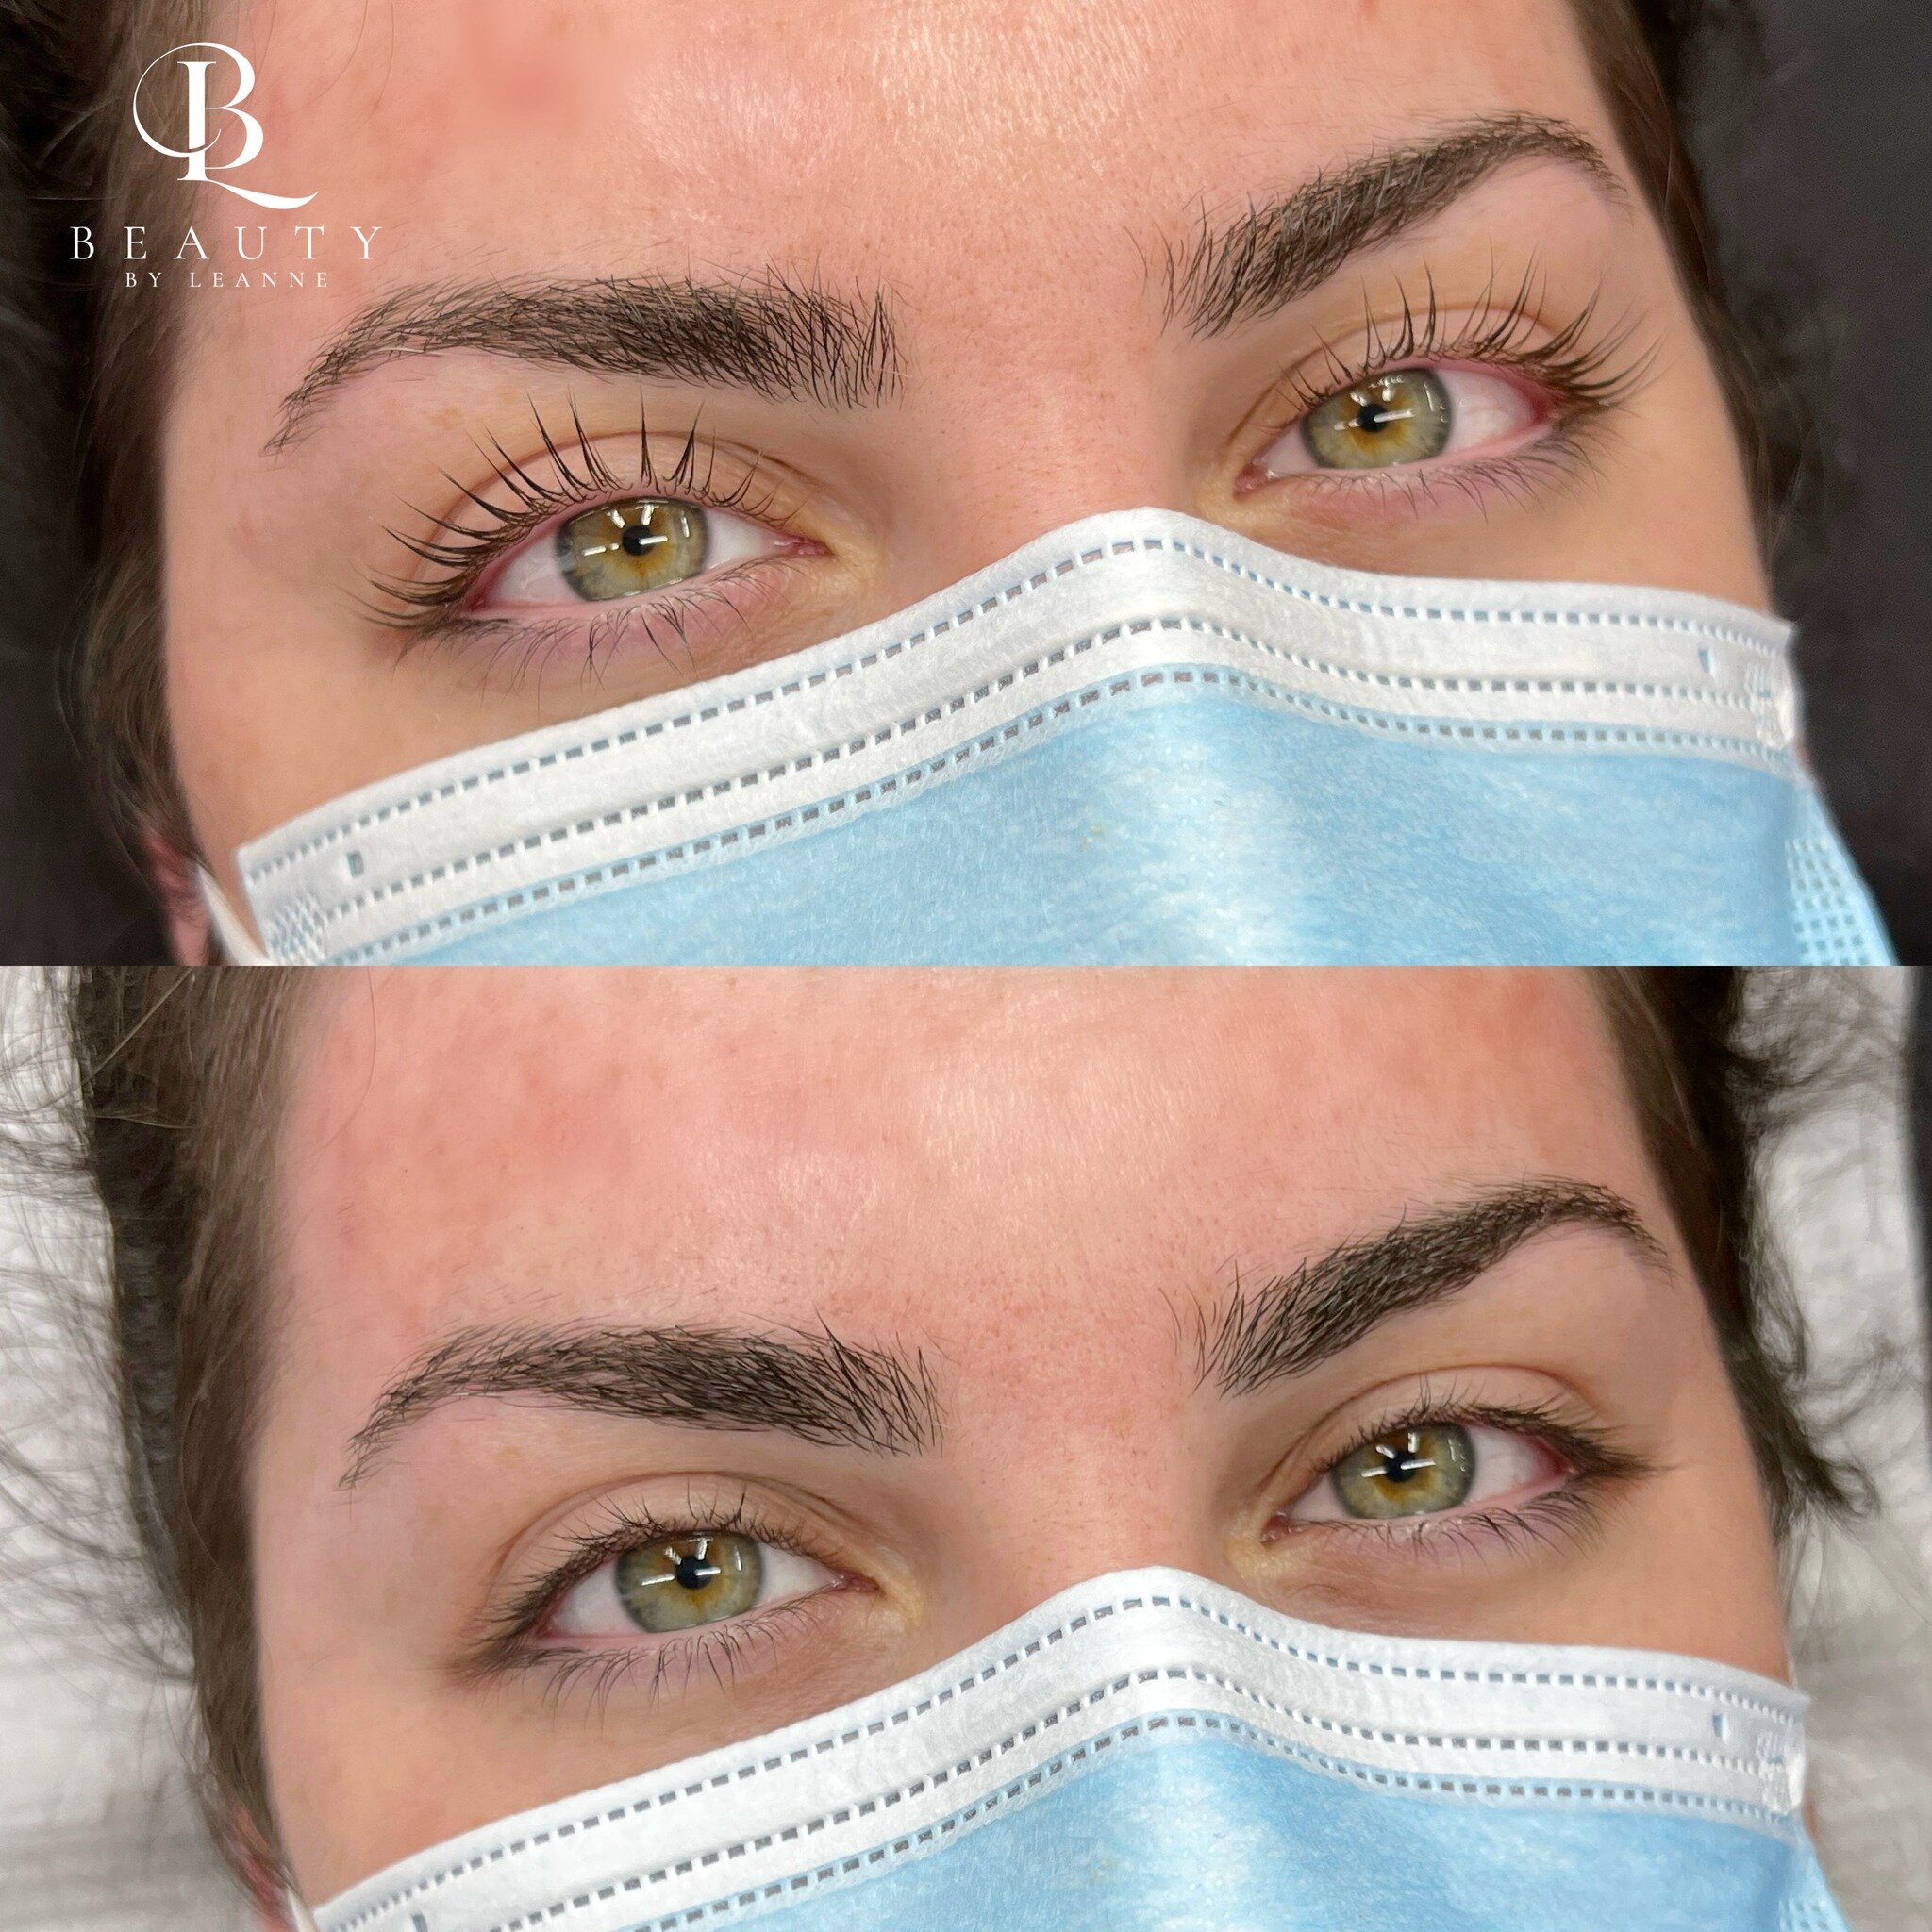 Instant eye lift with a lash lift service. Try it out to see for yourself!

.
.
.

Online booking available for your convenience!  Add yourself to the wait list if you cannot find a suitable date/time. Email or call us for more details.

Beauty by Le